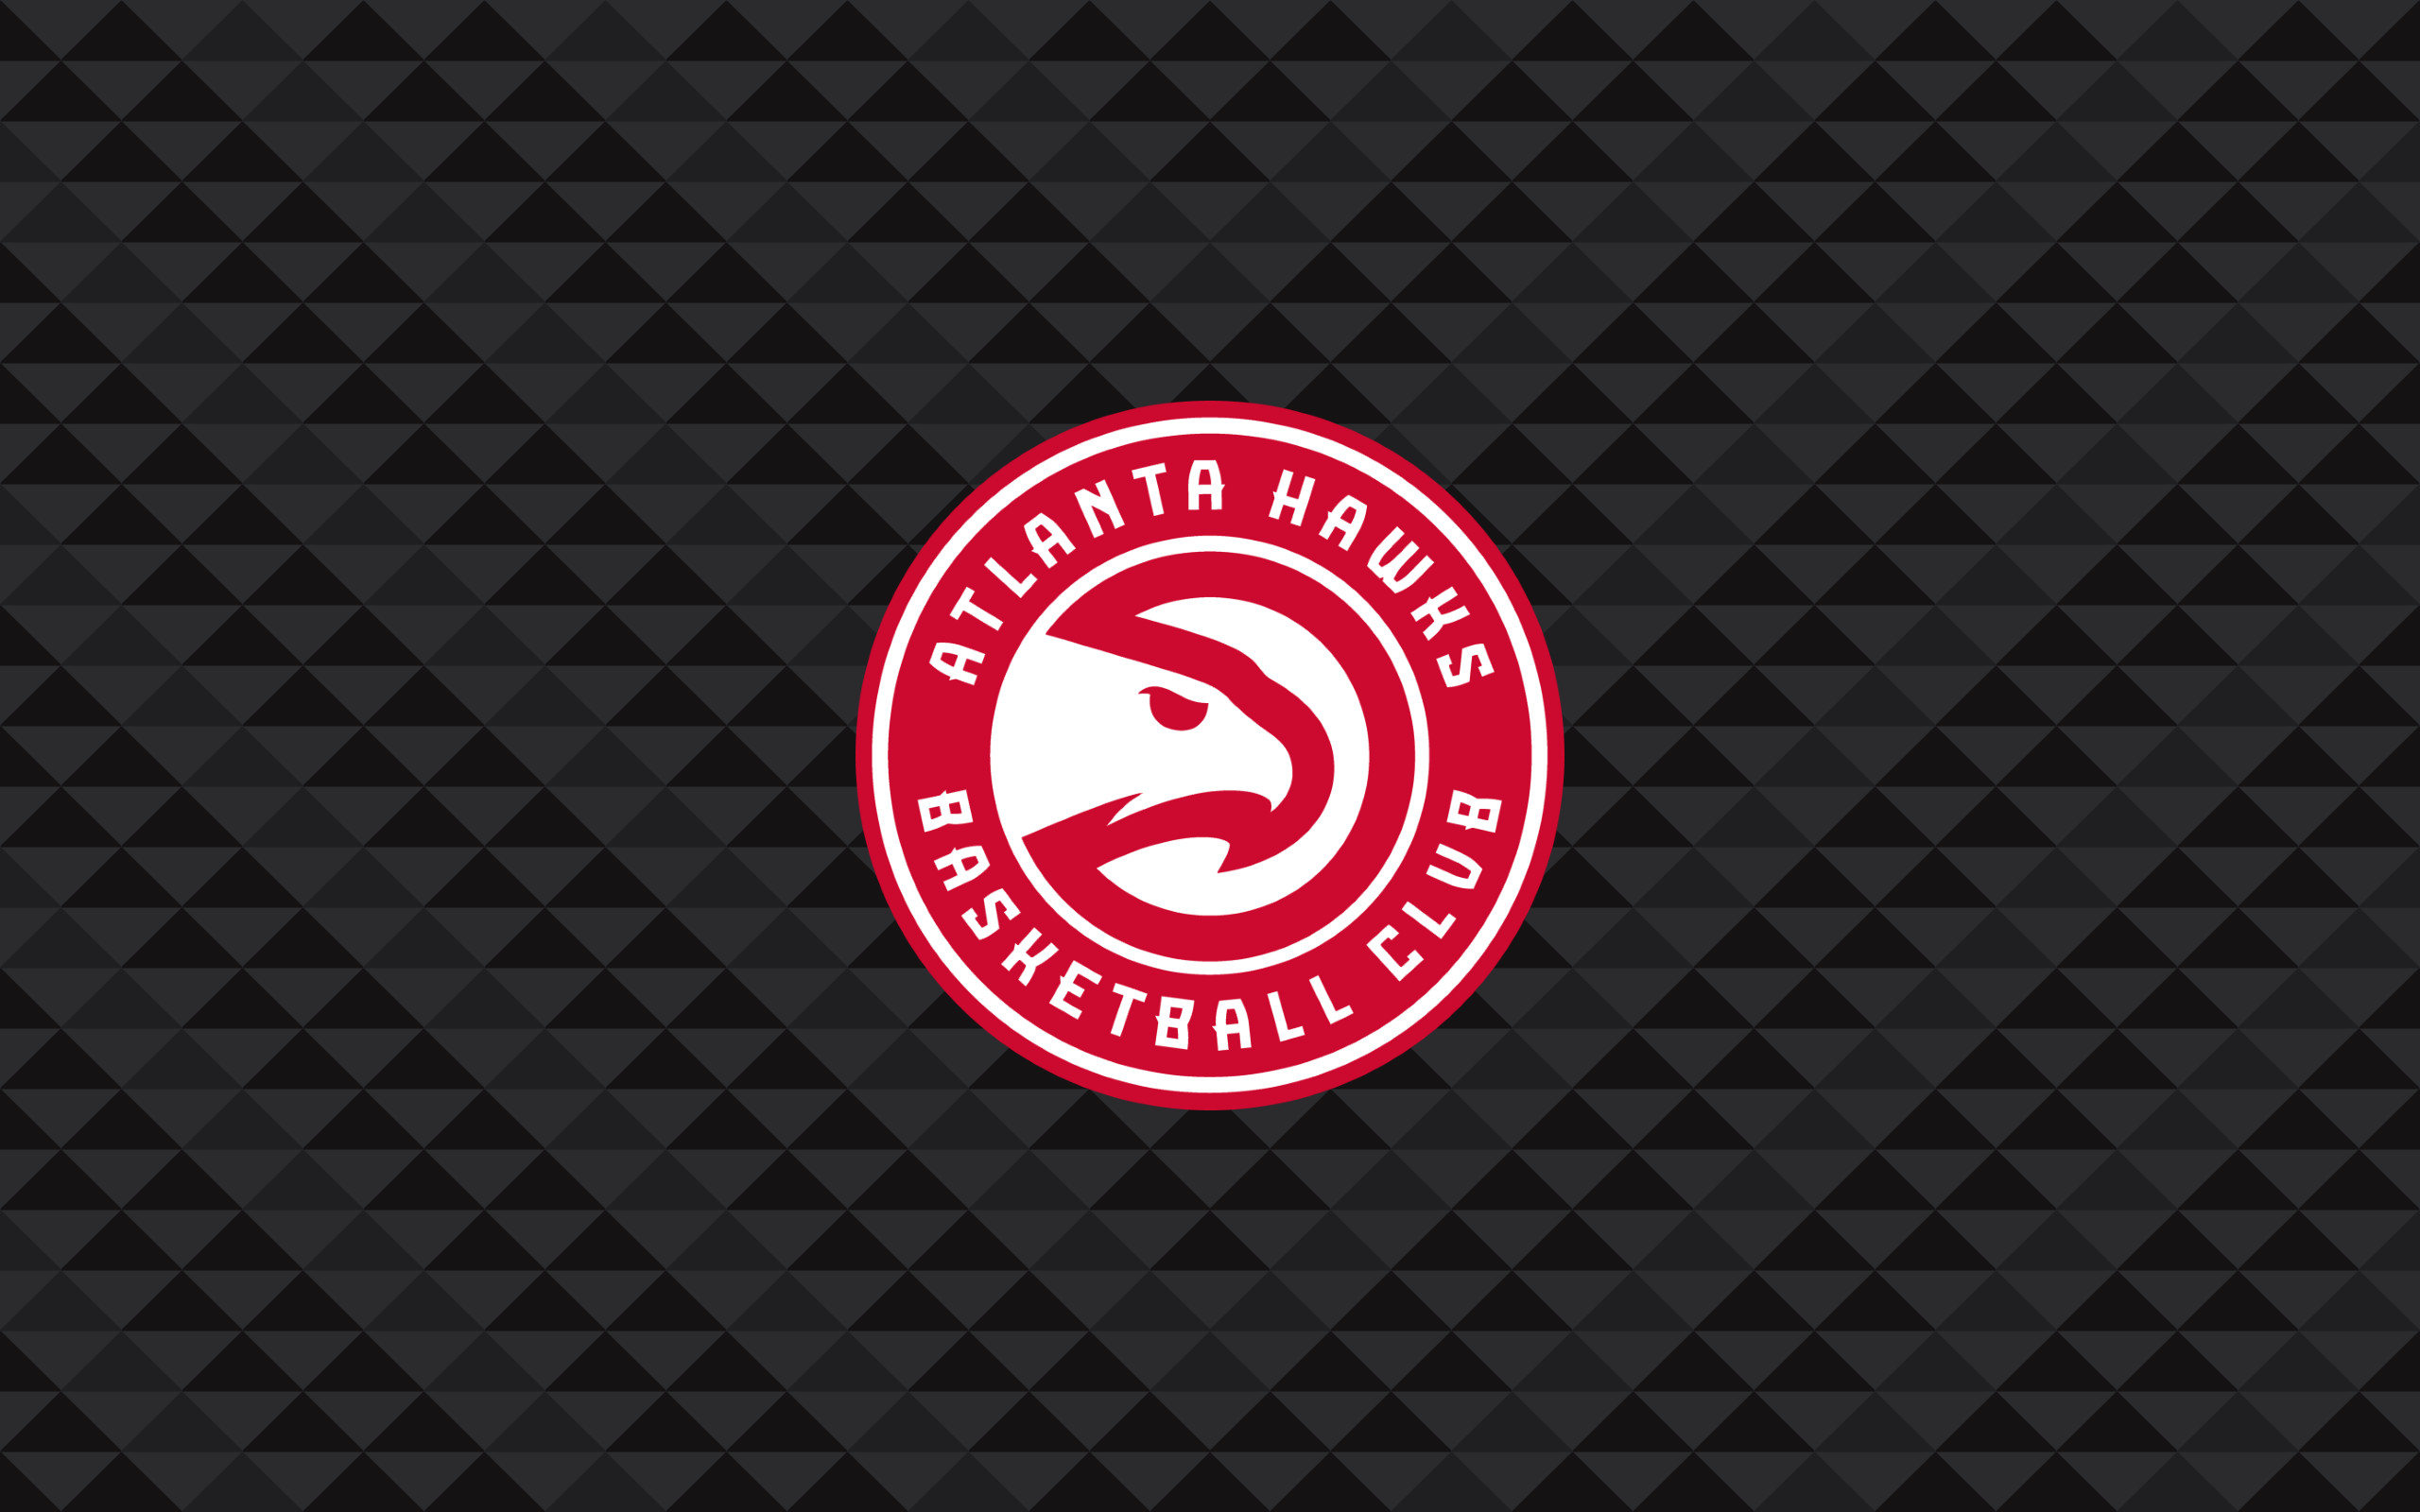 2560x1600 Make your Atlanta Hawks NBA themed bathroom match your team bedroom with  this Atlanta Hawks Sidelines Shower Curtain by Sports Coverage. This NBA  team ...